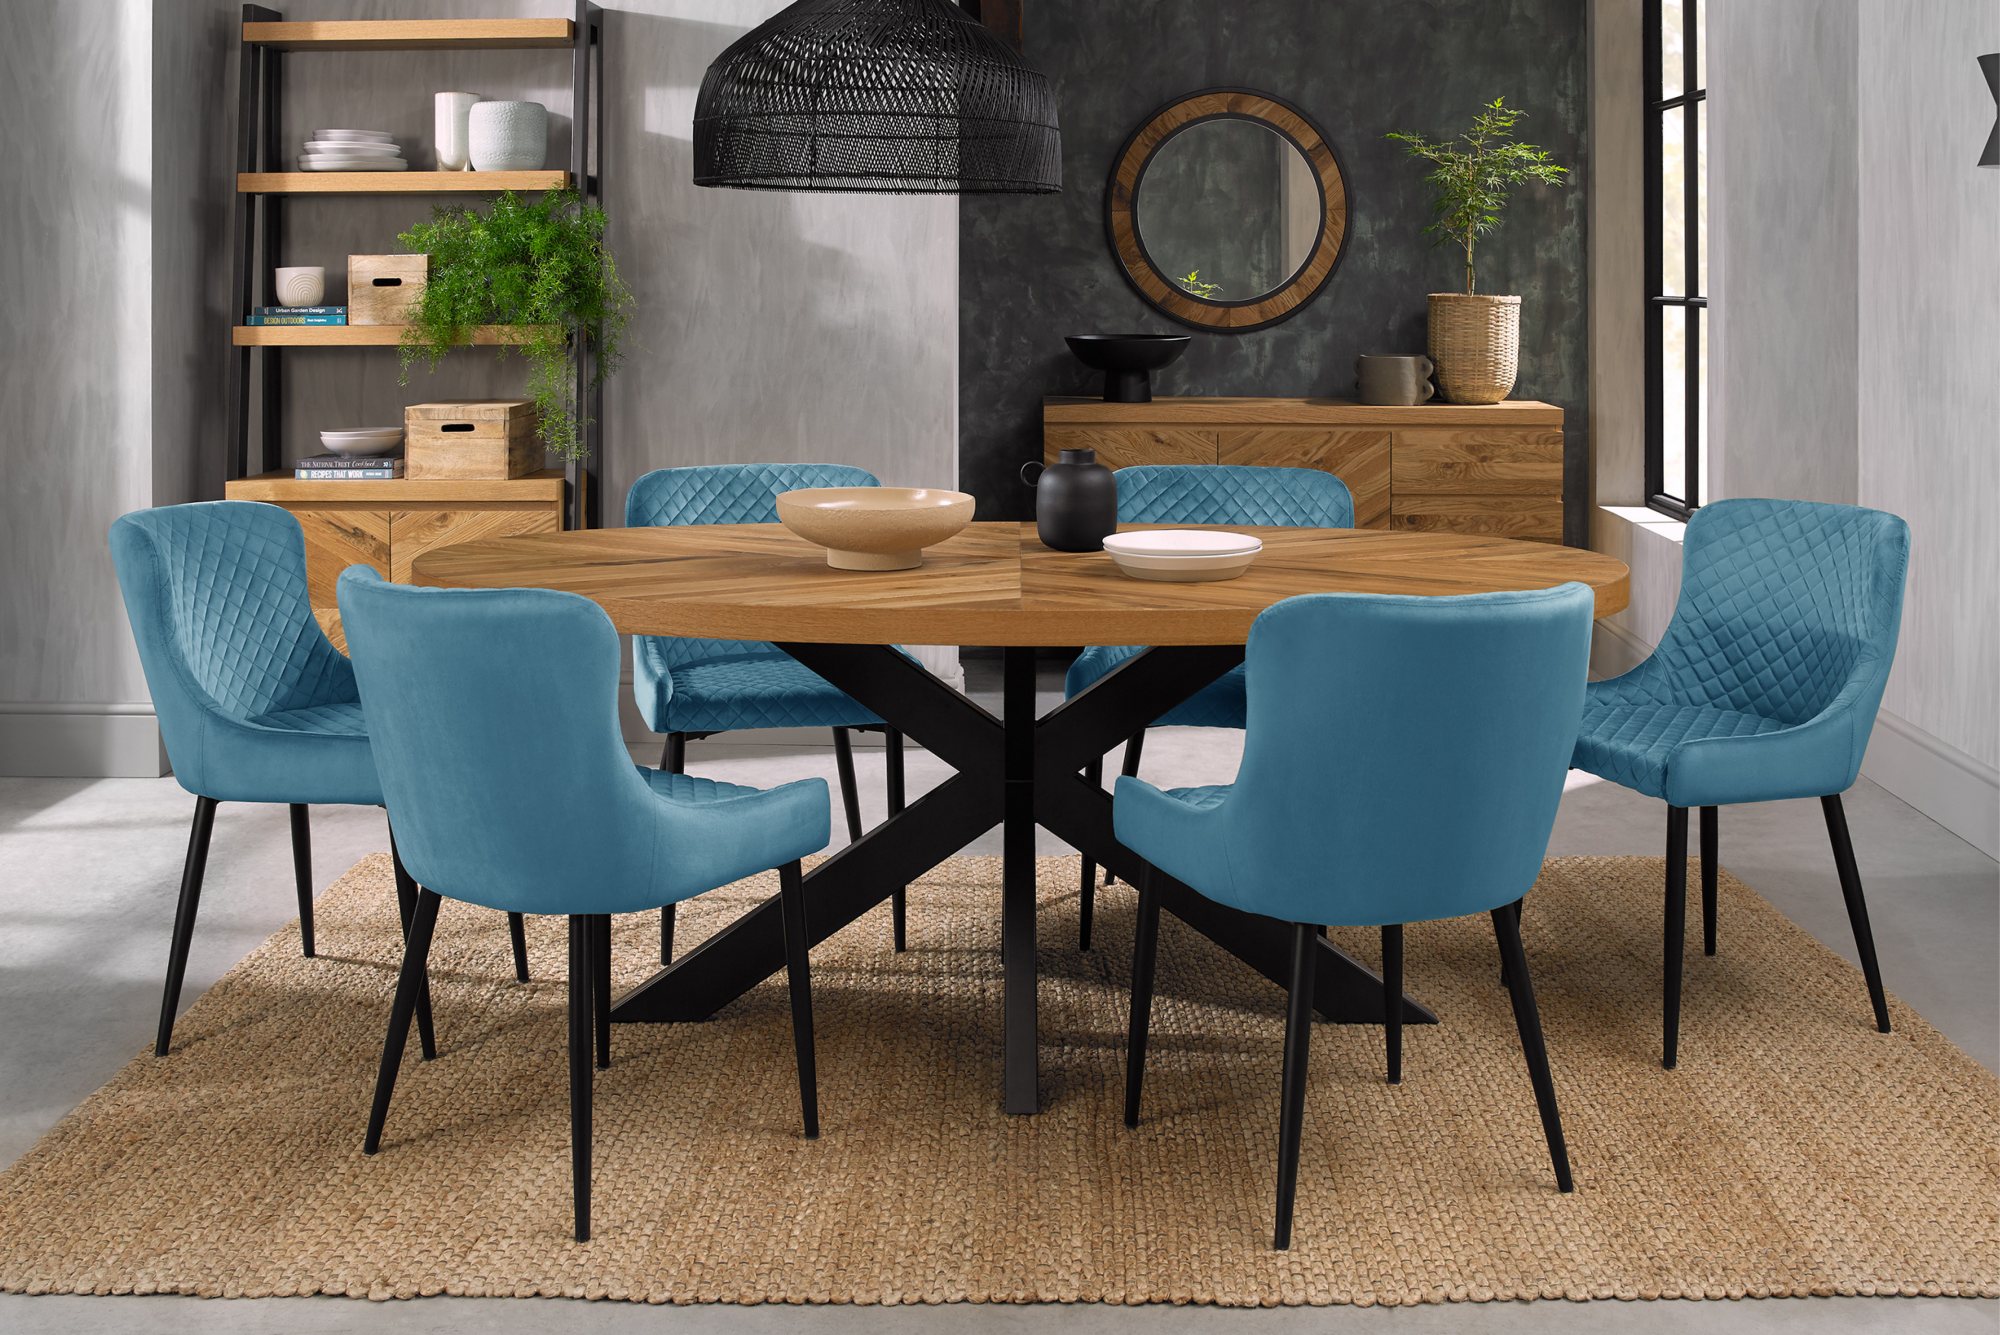 Home Origins Bosco Rustic Oak 6 seater dining table with 6 Cezanne chairs- petrol blue velvet fabric